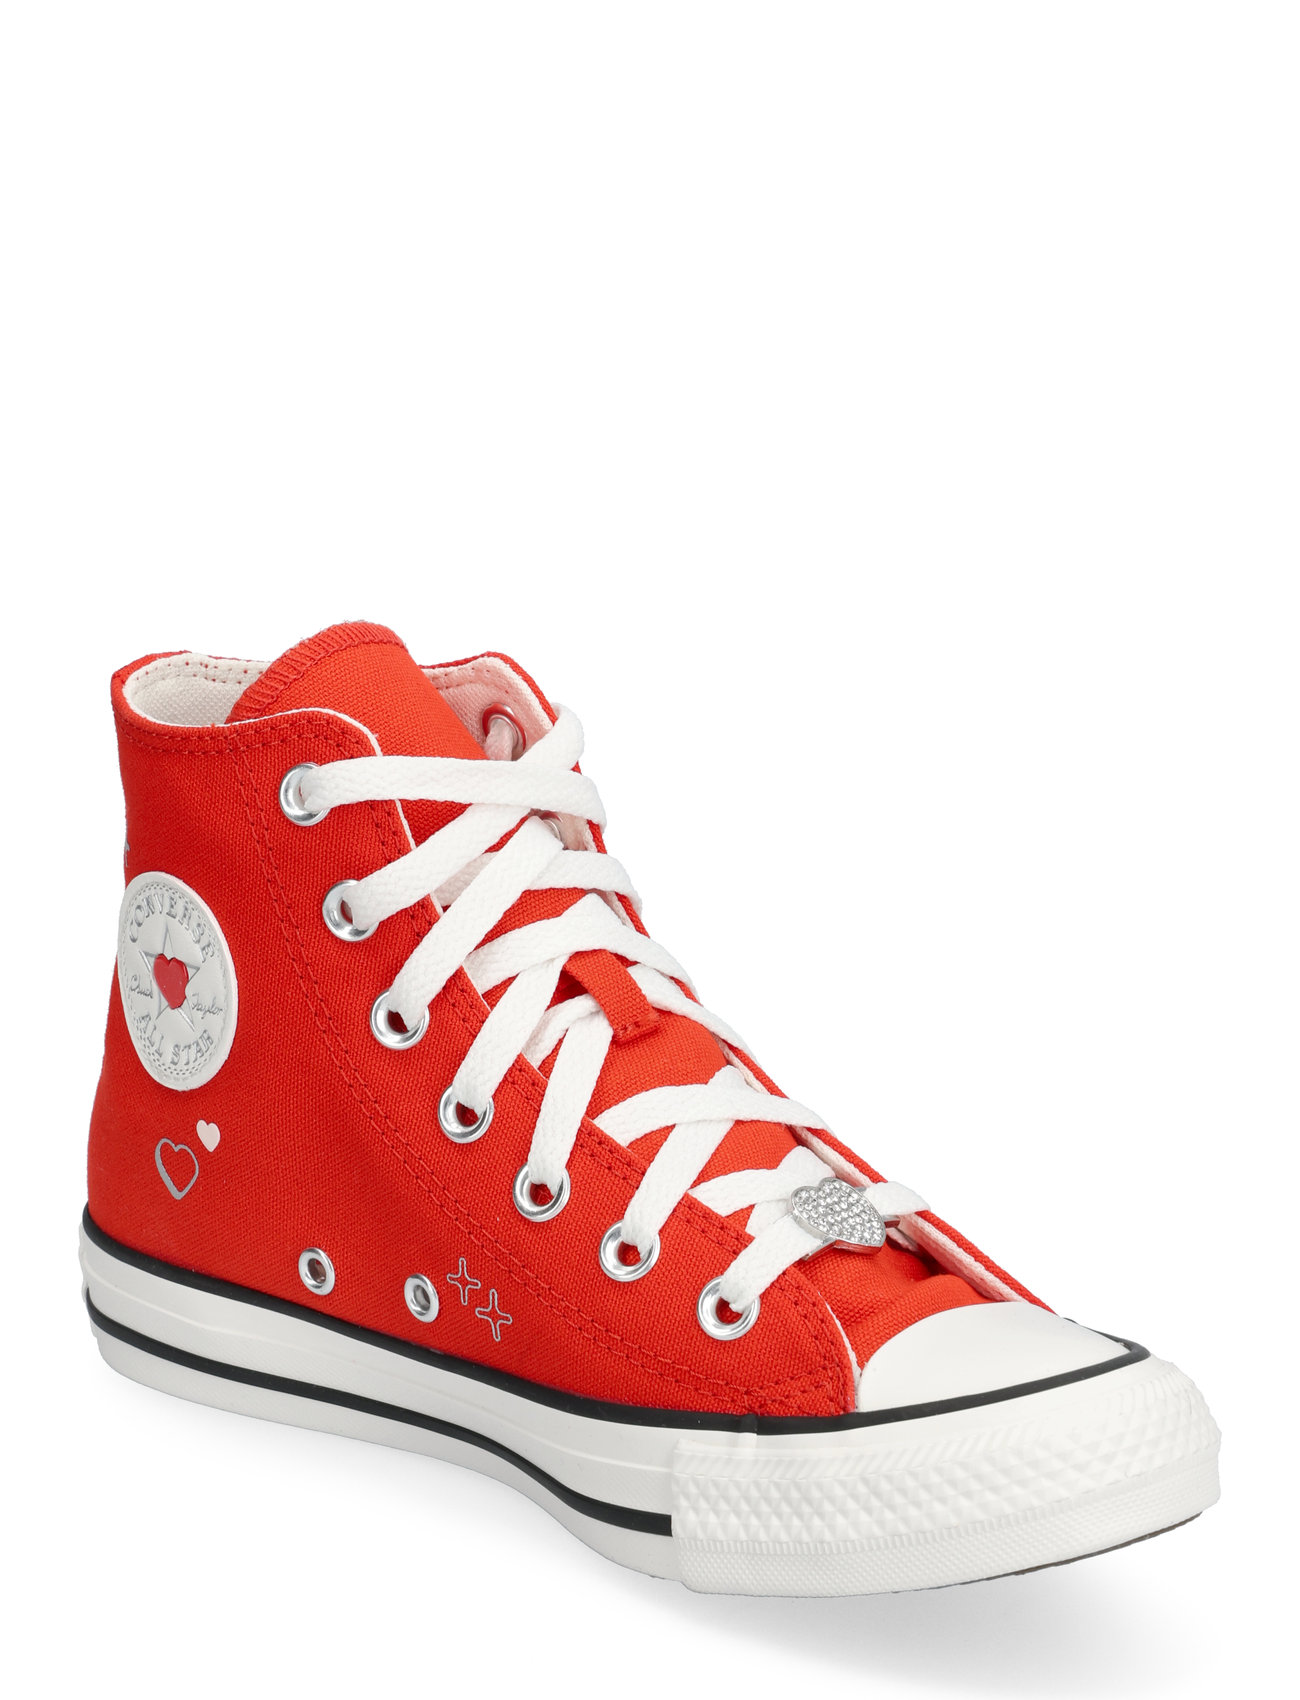 Converse "Chuck Taylor All Star High-top Sneakers Red Converse"